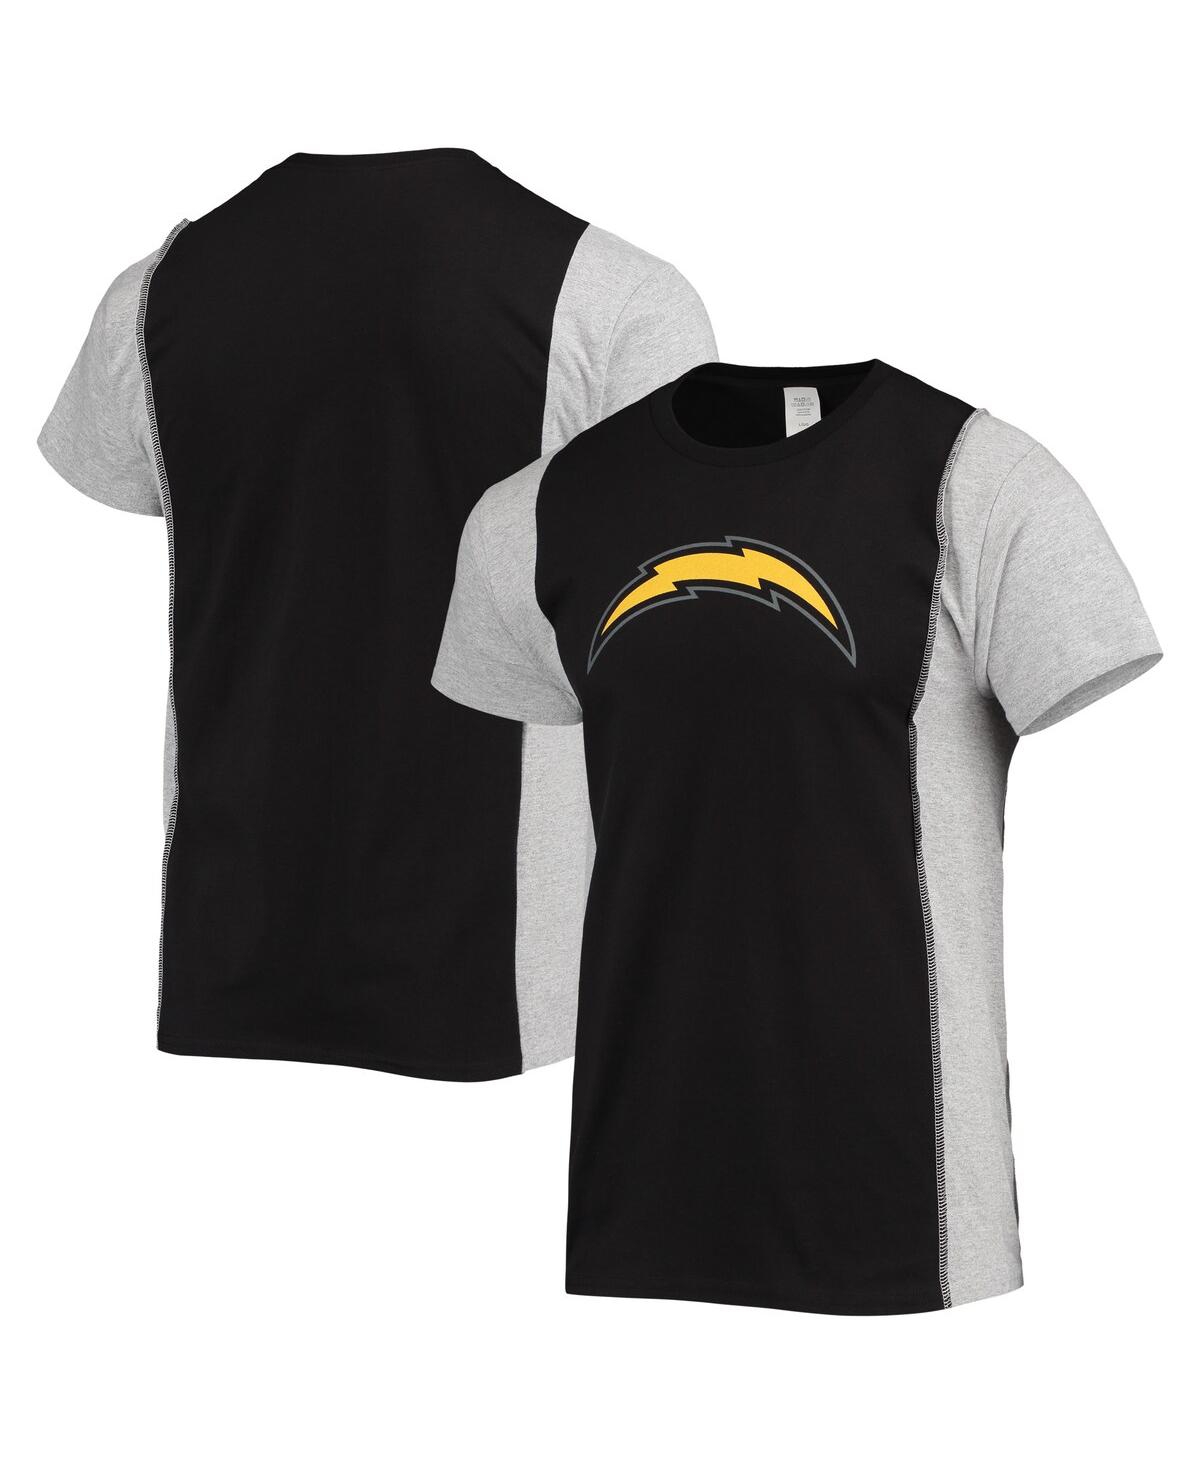 Men's Refried Apparel Black, Heathered Gray Los Angeles Chargers Split T-shirt - Black, Heathered Gray